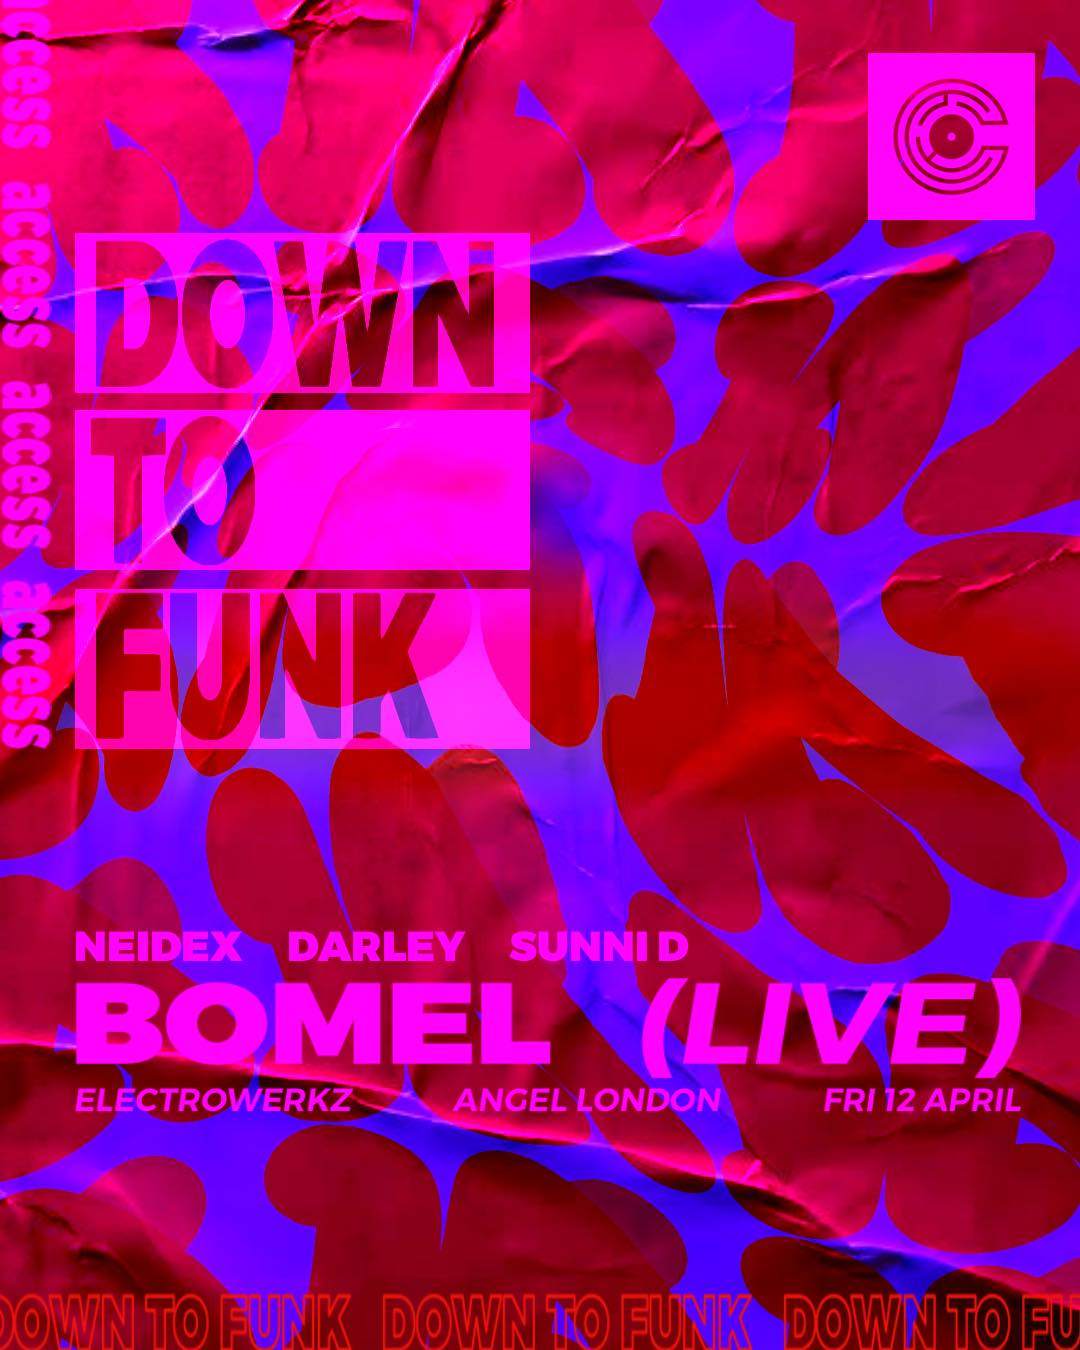 Access: Down To Funk with Bomel (Live) - Página frontal